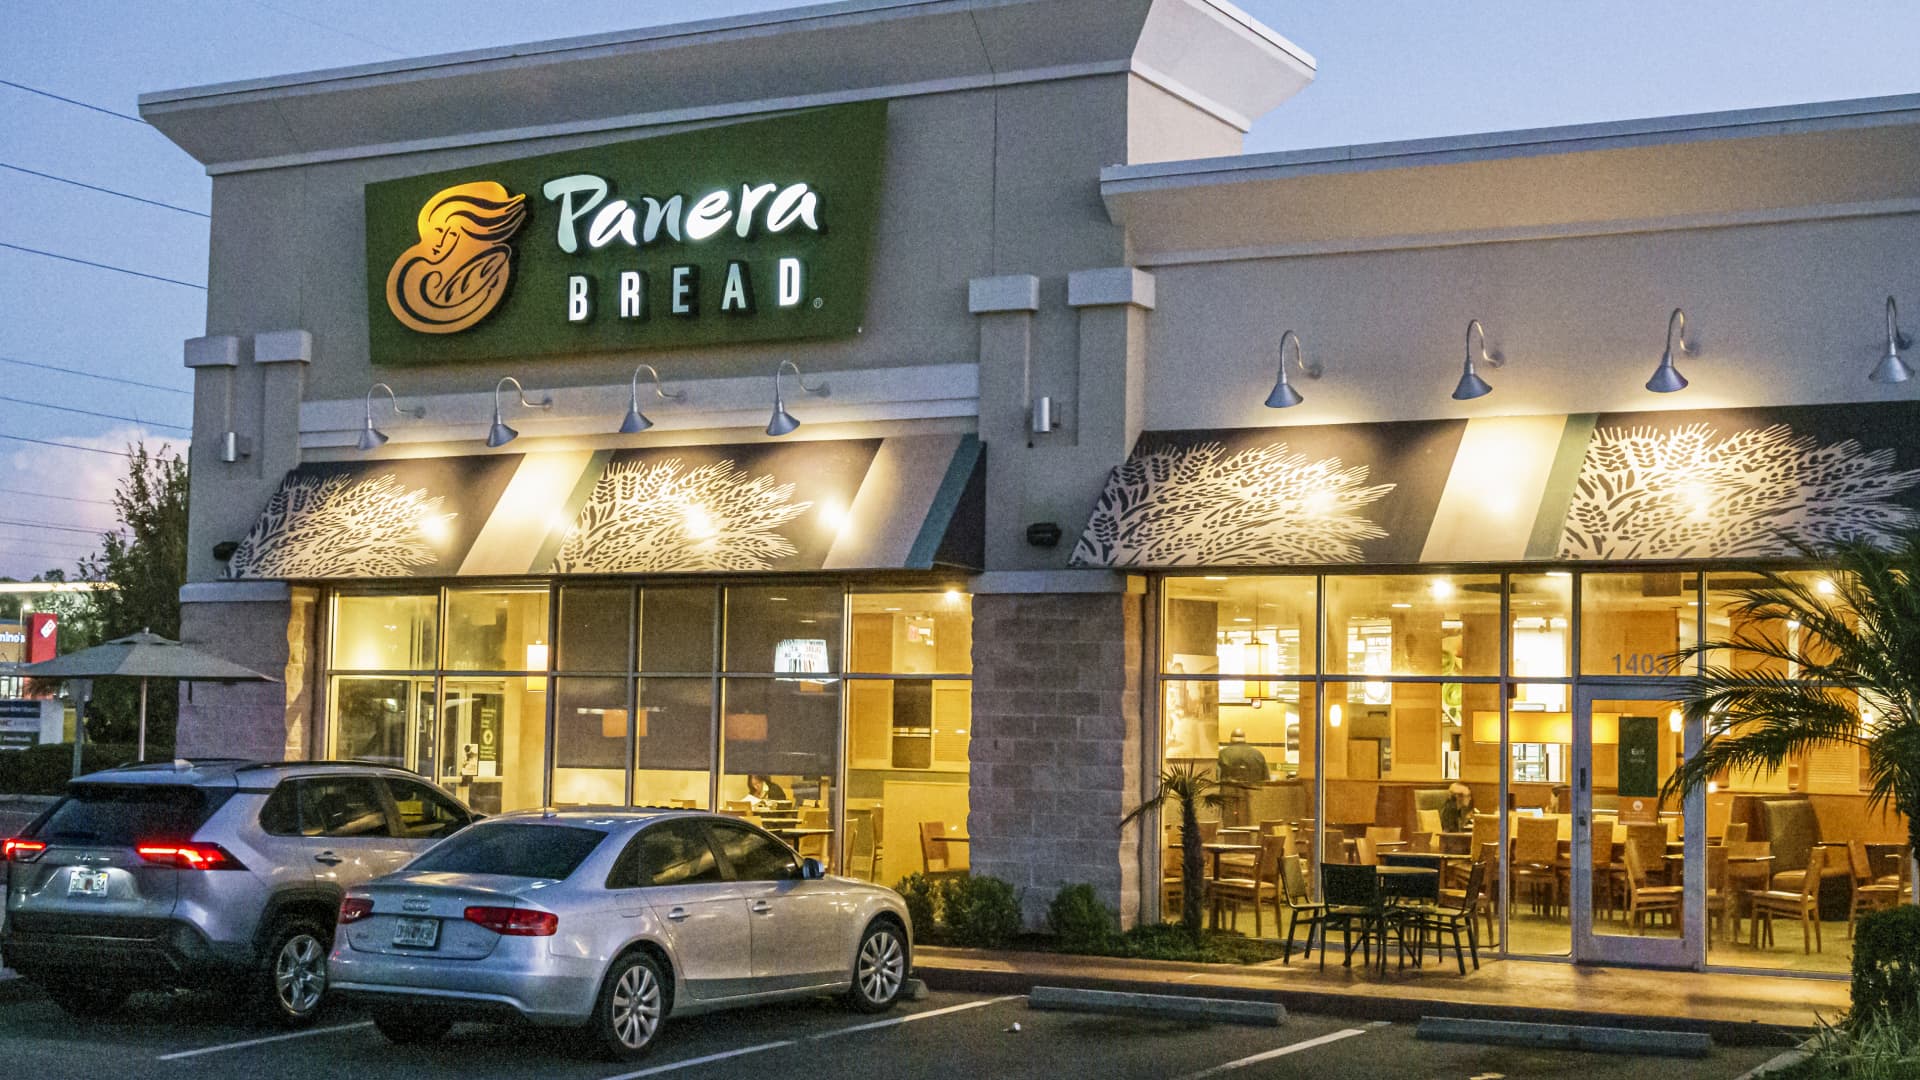 Panera Bread terminates SPAC deal with Danny Meyer’s investment group